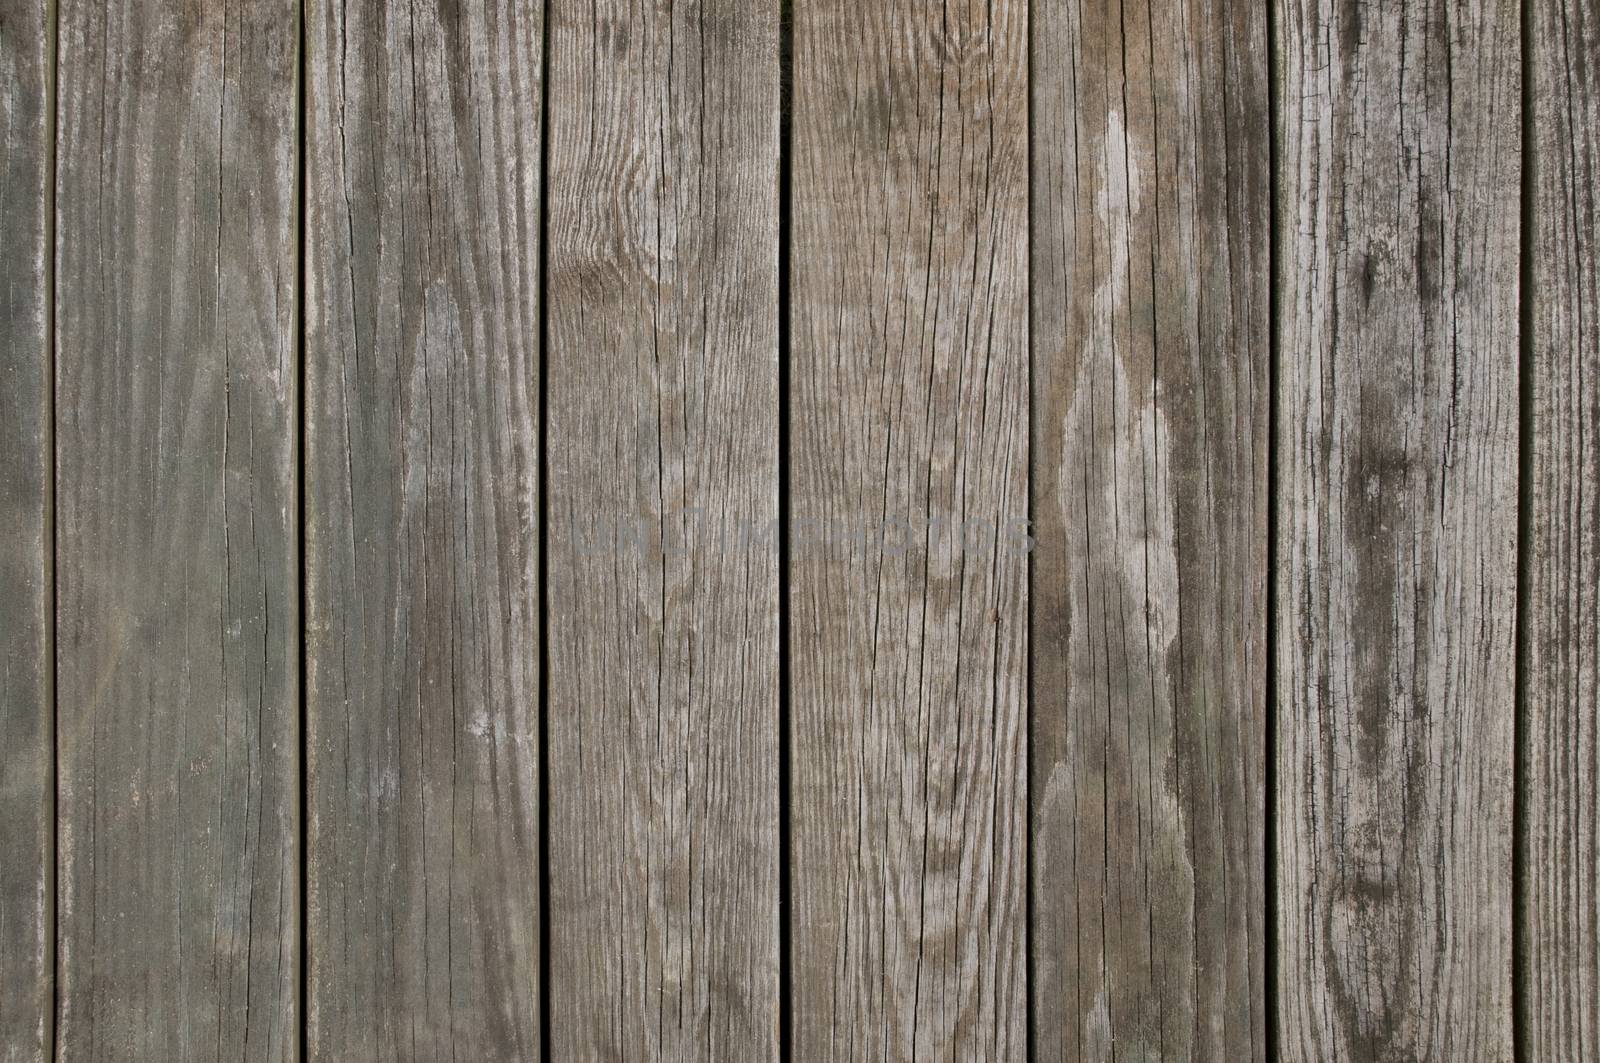 Weathered wooden planking background texture by Balefire9